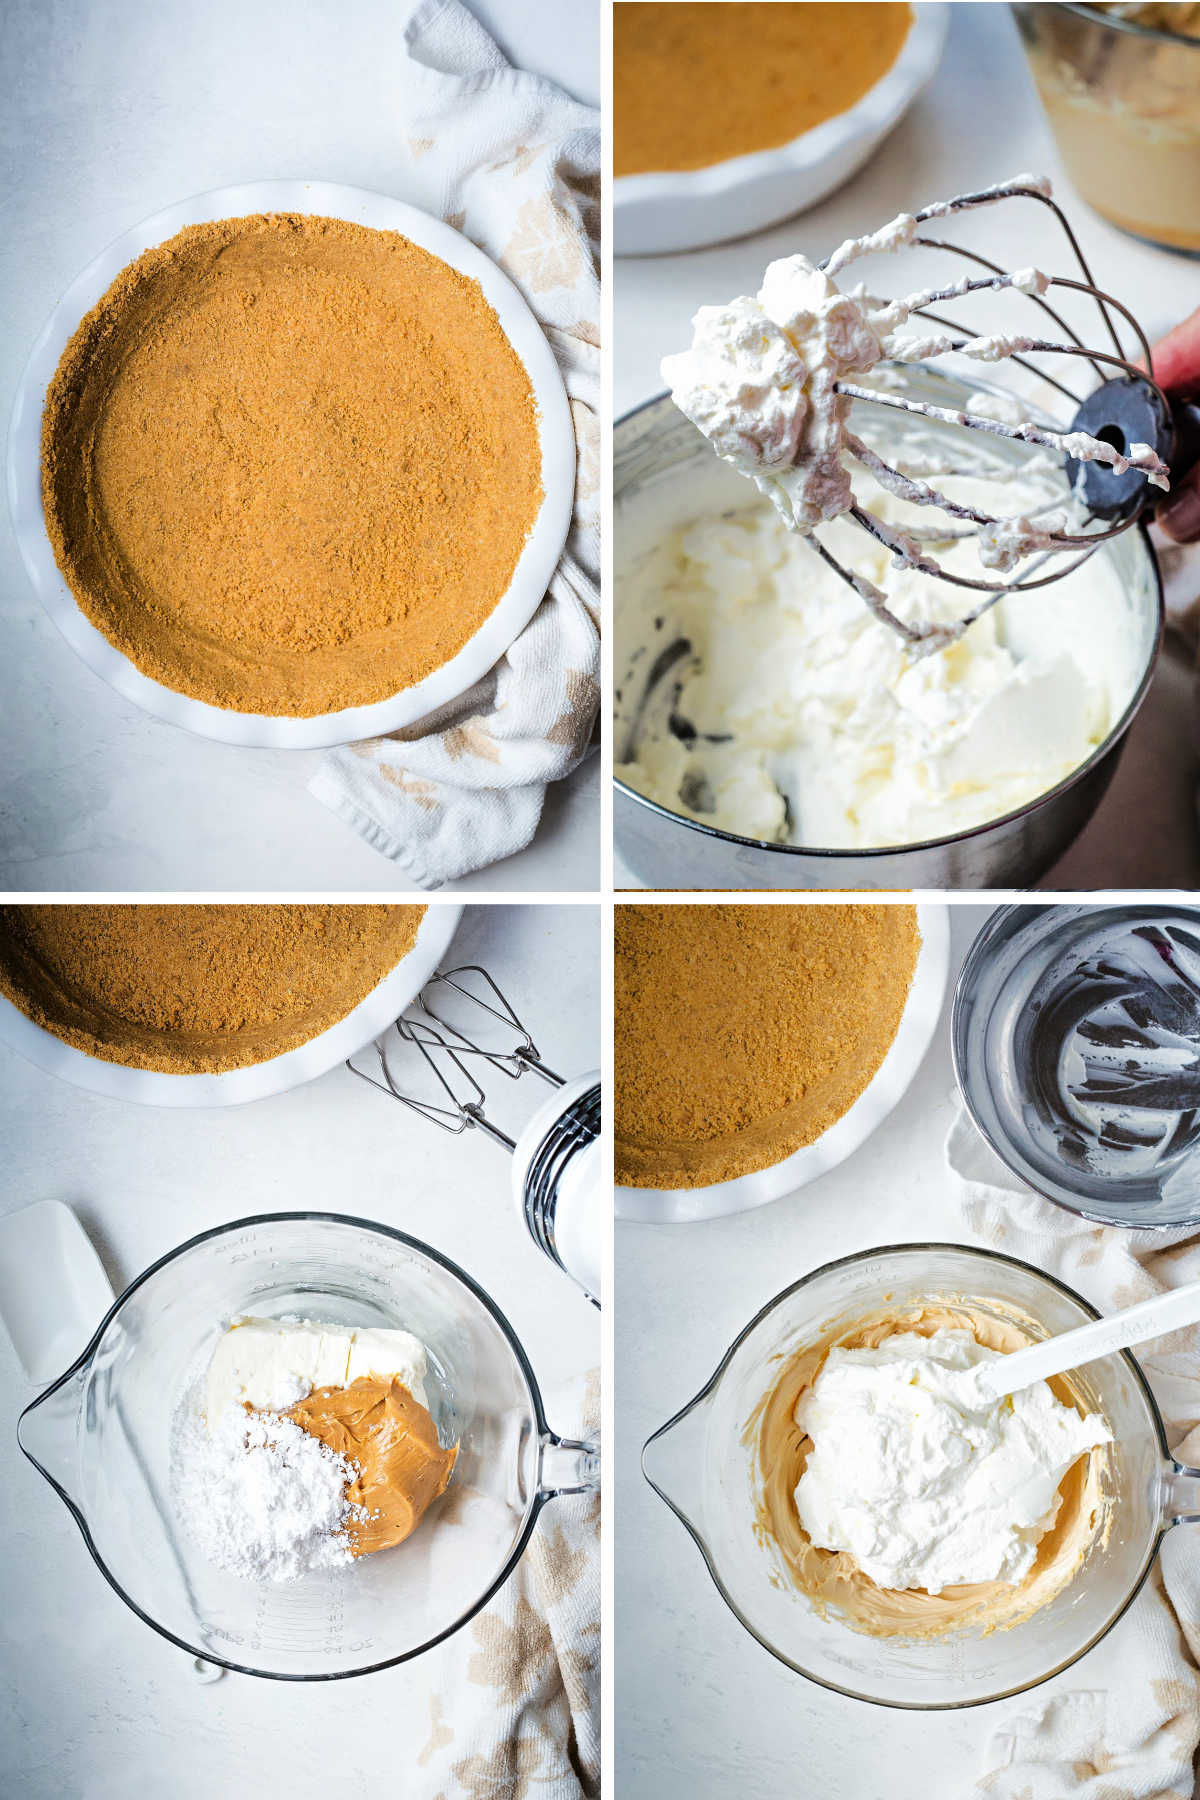 process steps for making peanut butter pie: prepare the graham cracker crust; whip heavy cream until stiff; combine ingredients; fold in the whipped cream.